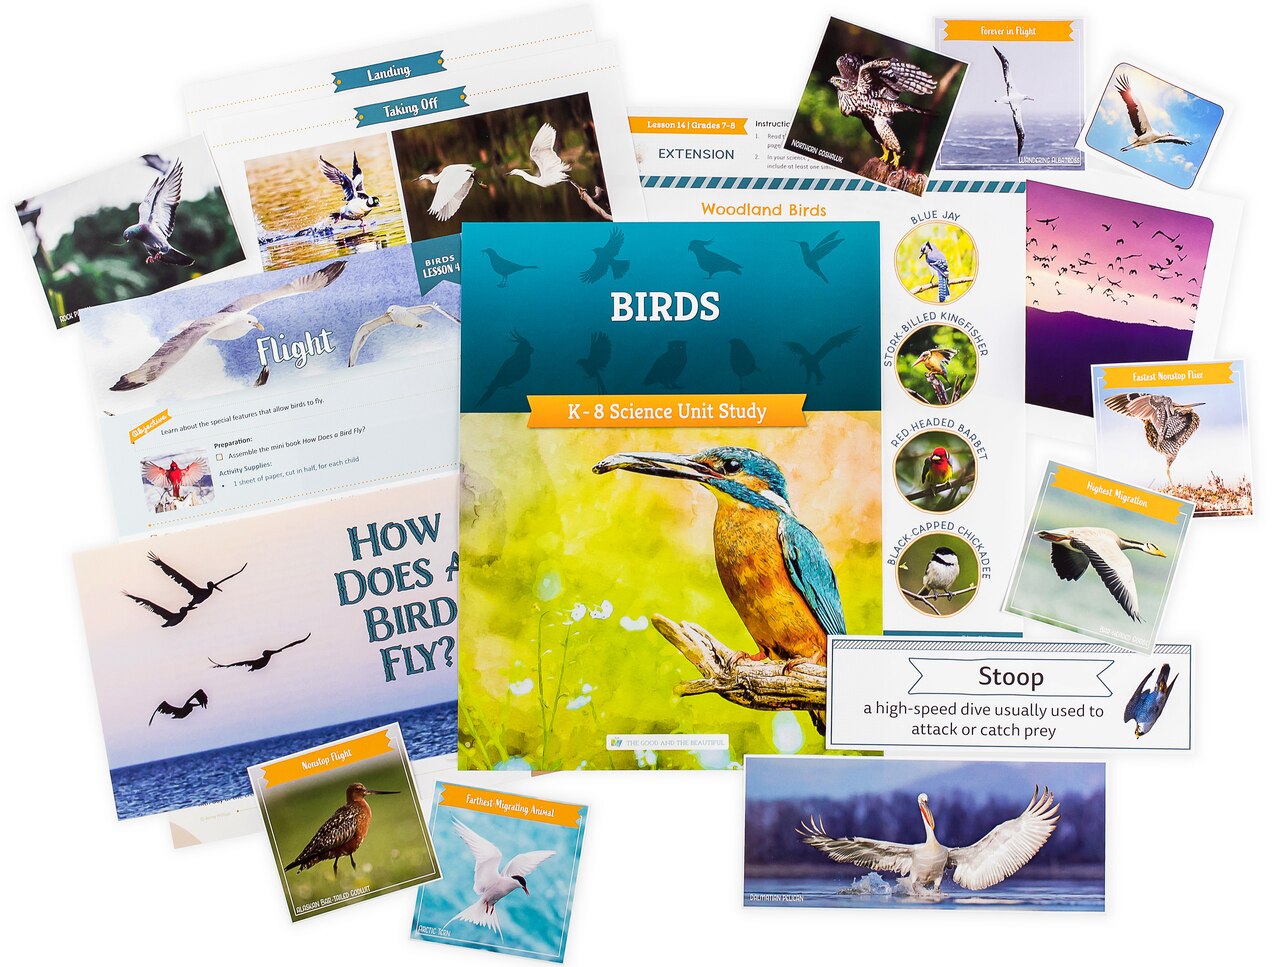 Birds Science Unit includes activities, experiments, mini books, games, and more!